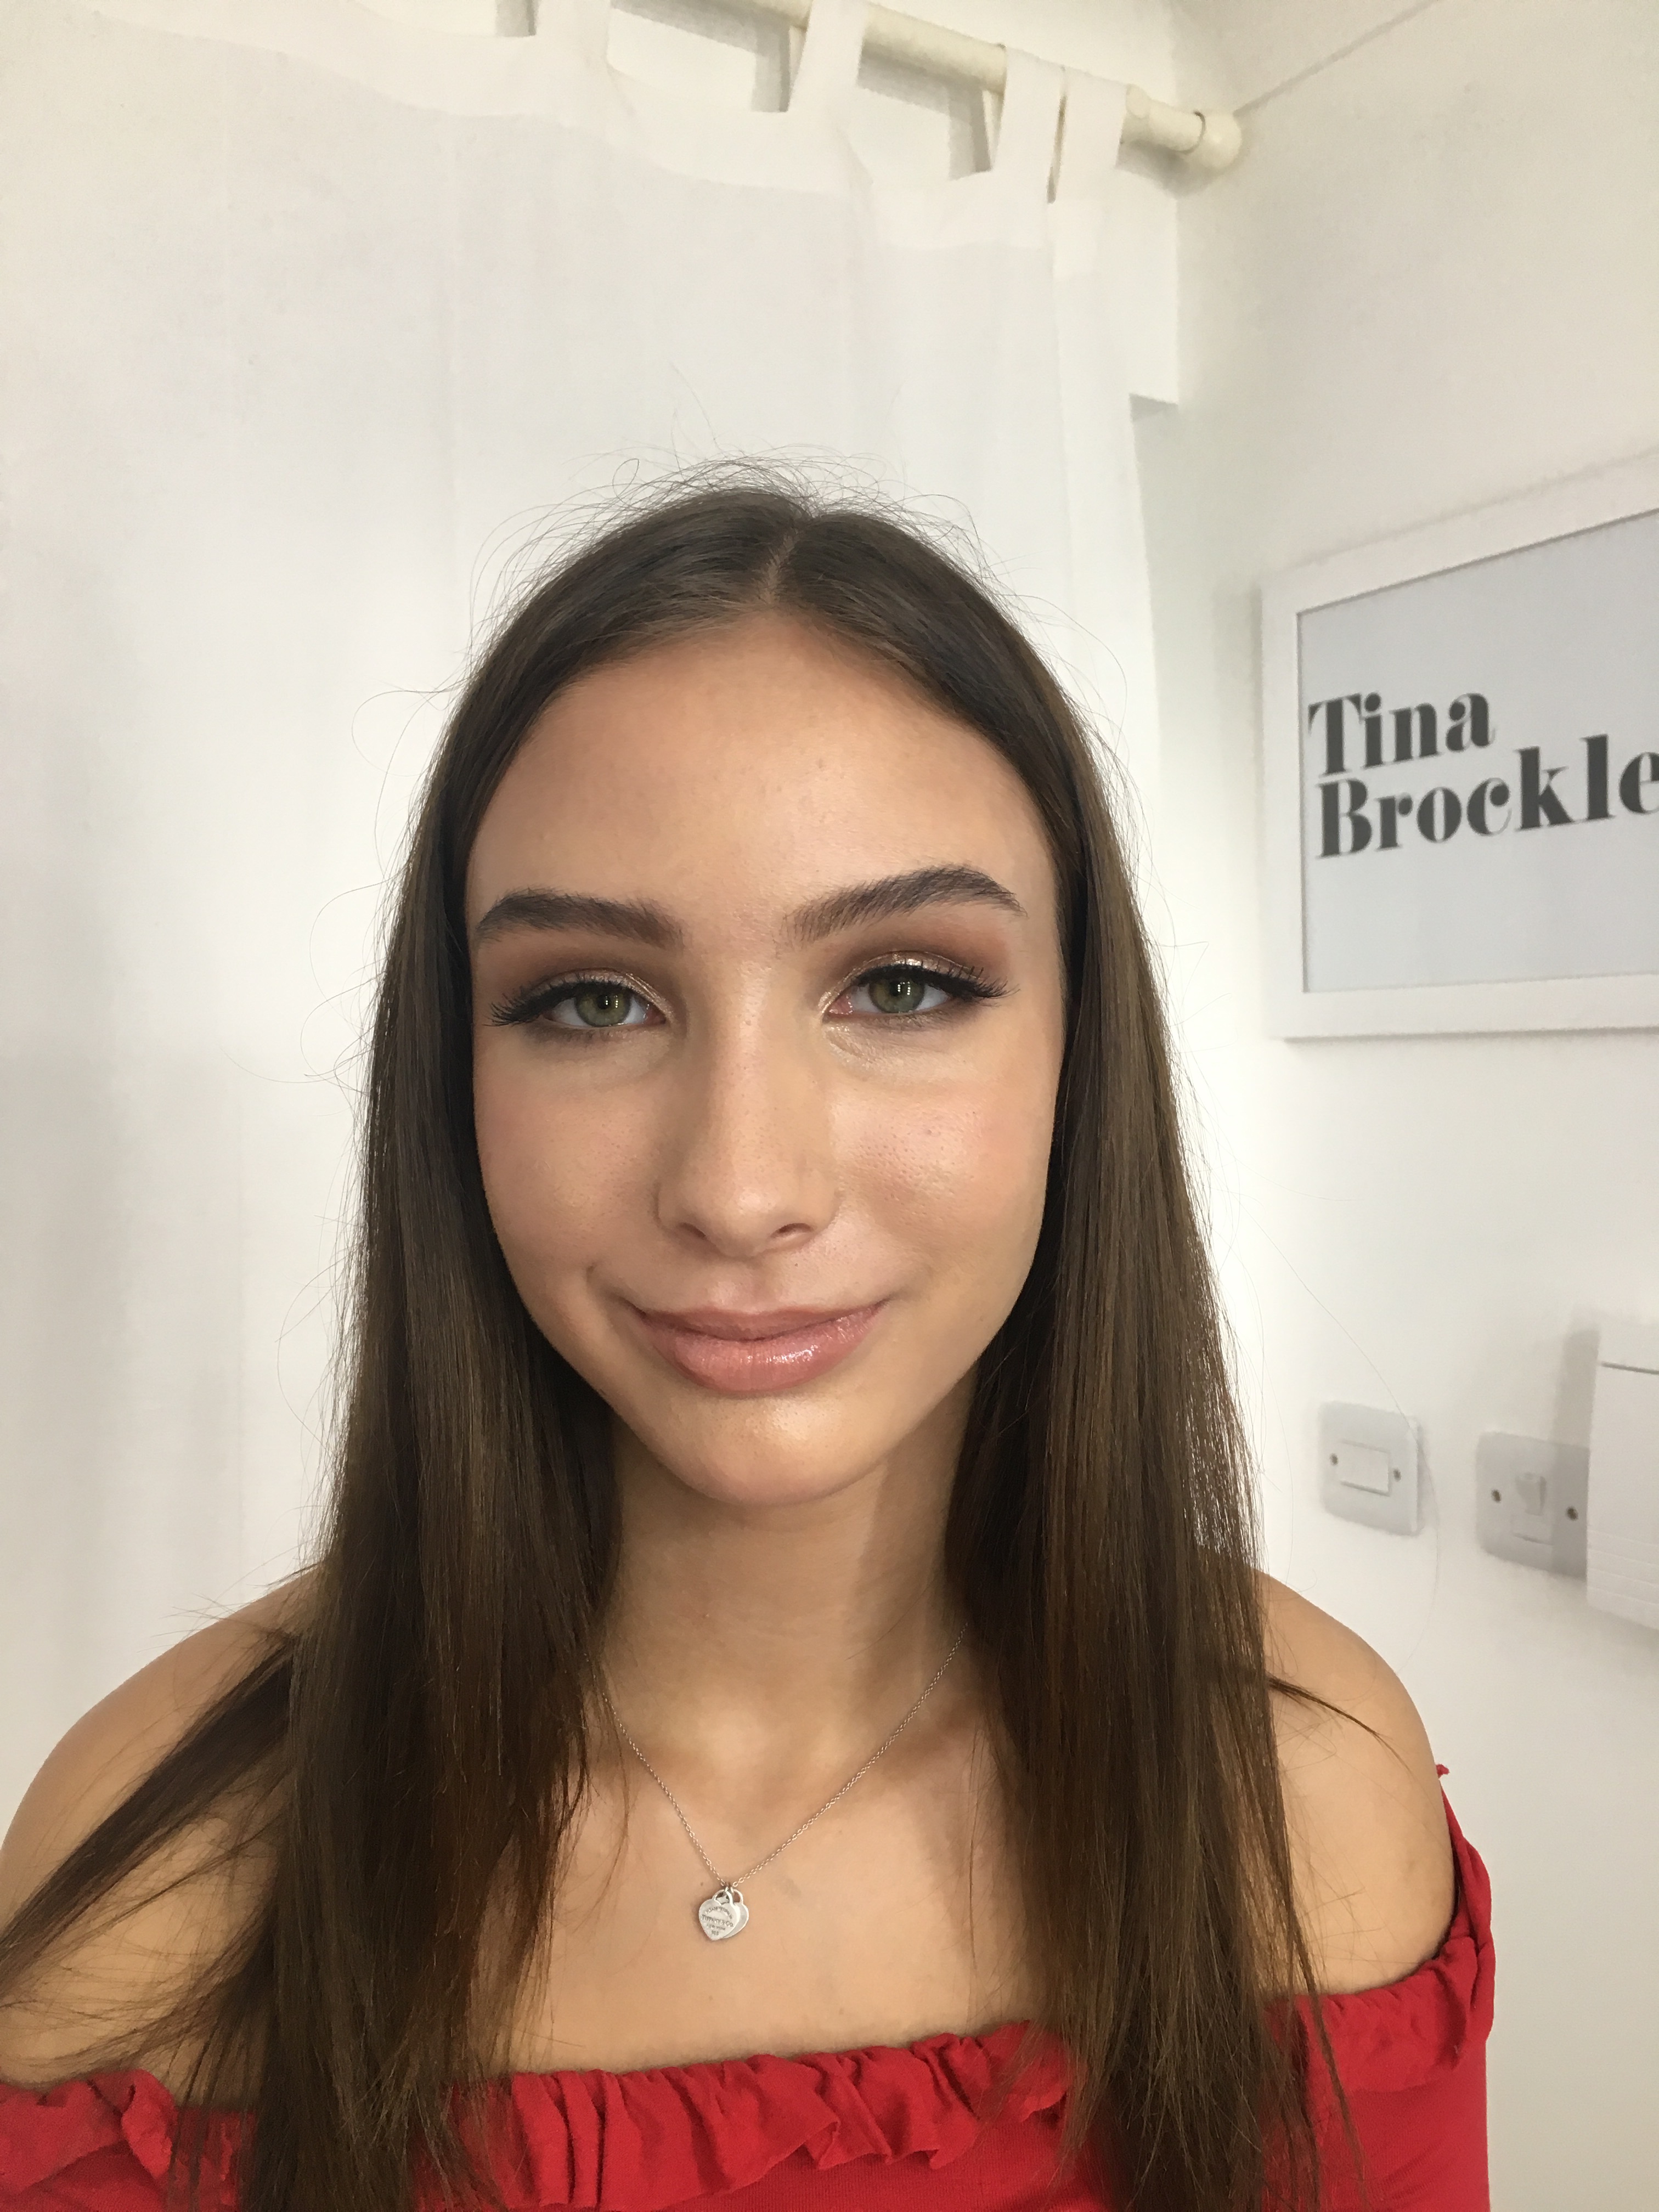 Amelia visited me as she was suffering with acne unfortunately. I helped her with the right skin prep and also showed her the best makeup to use to conceal any blemishes and also techniques for her to practise. She loved the result!